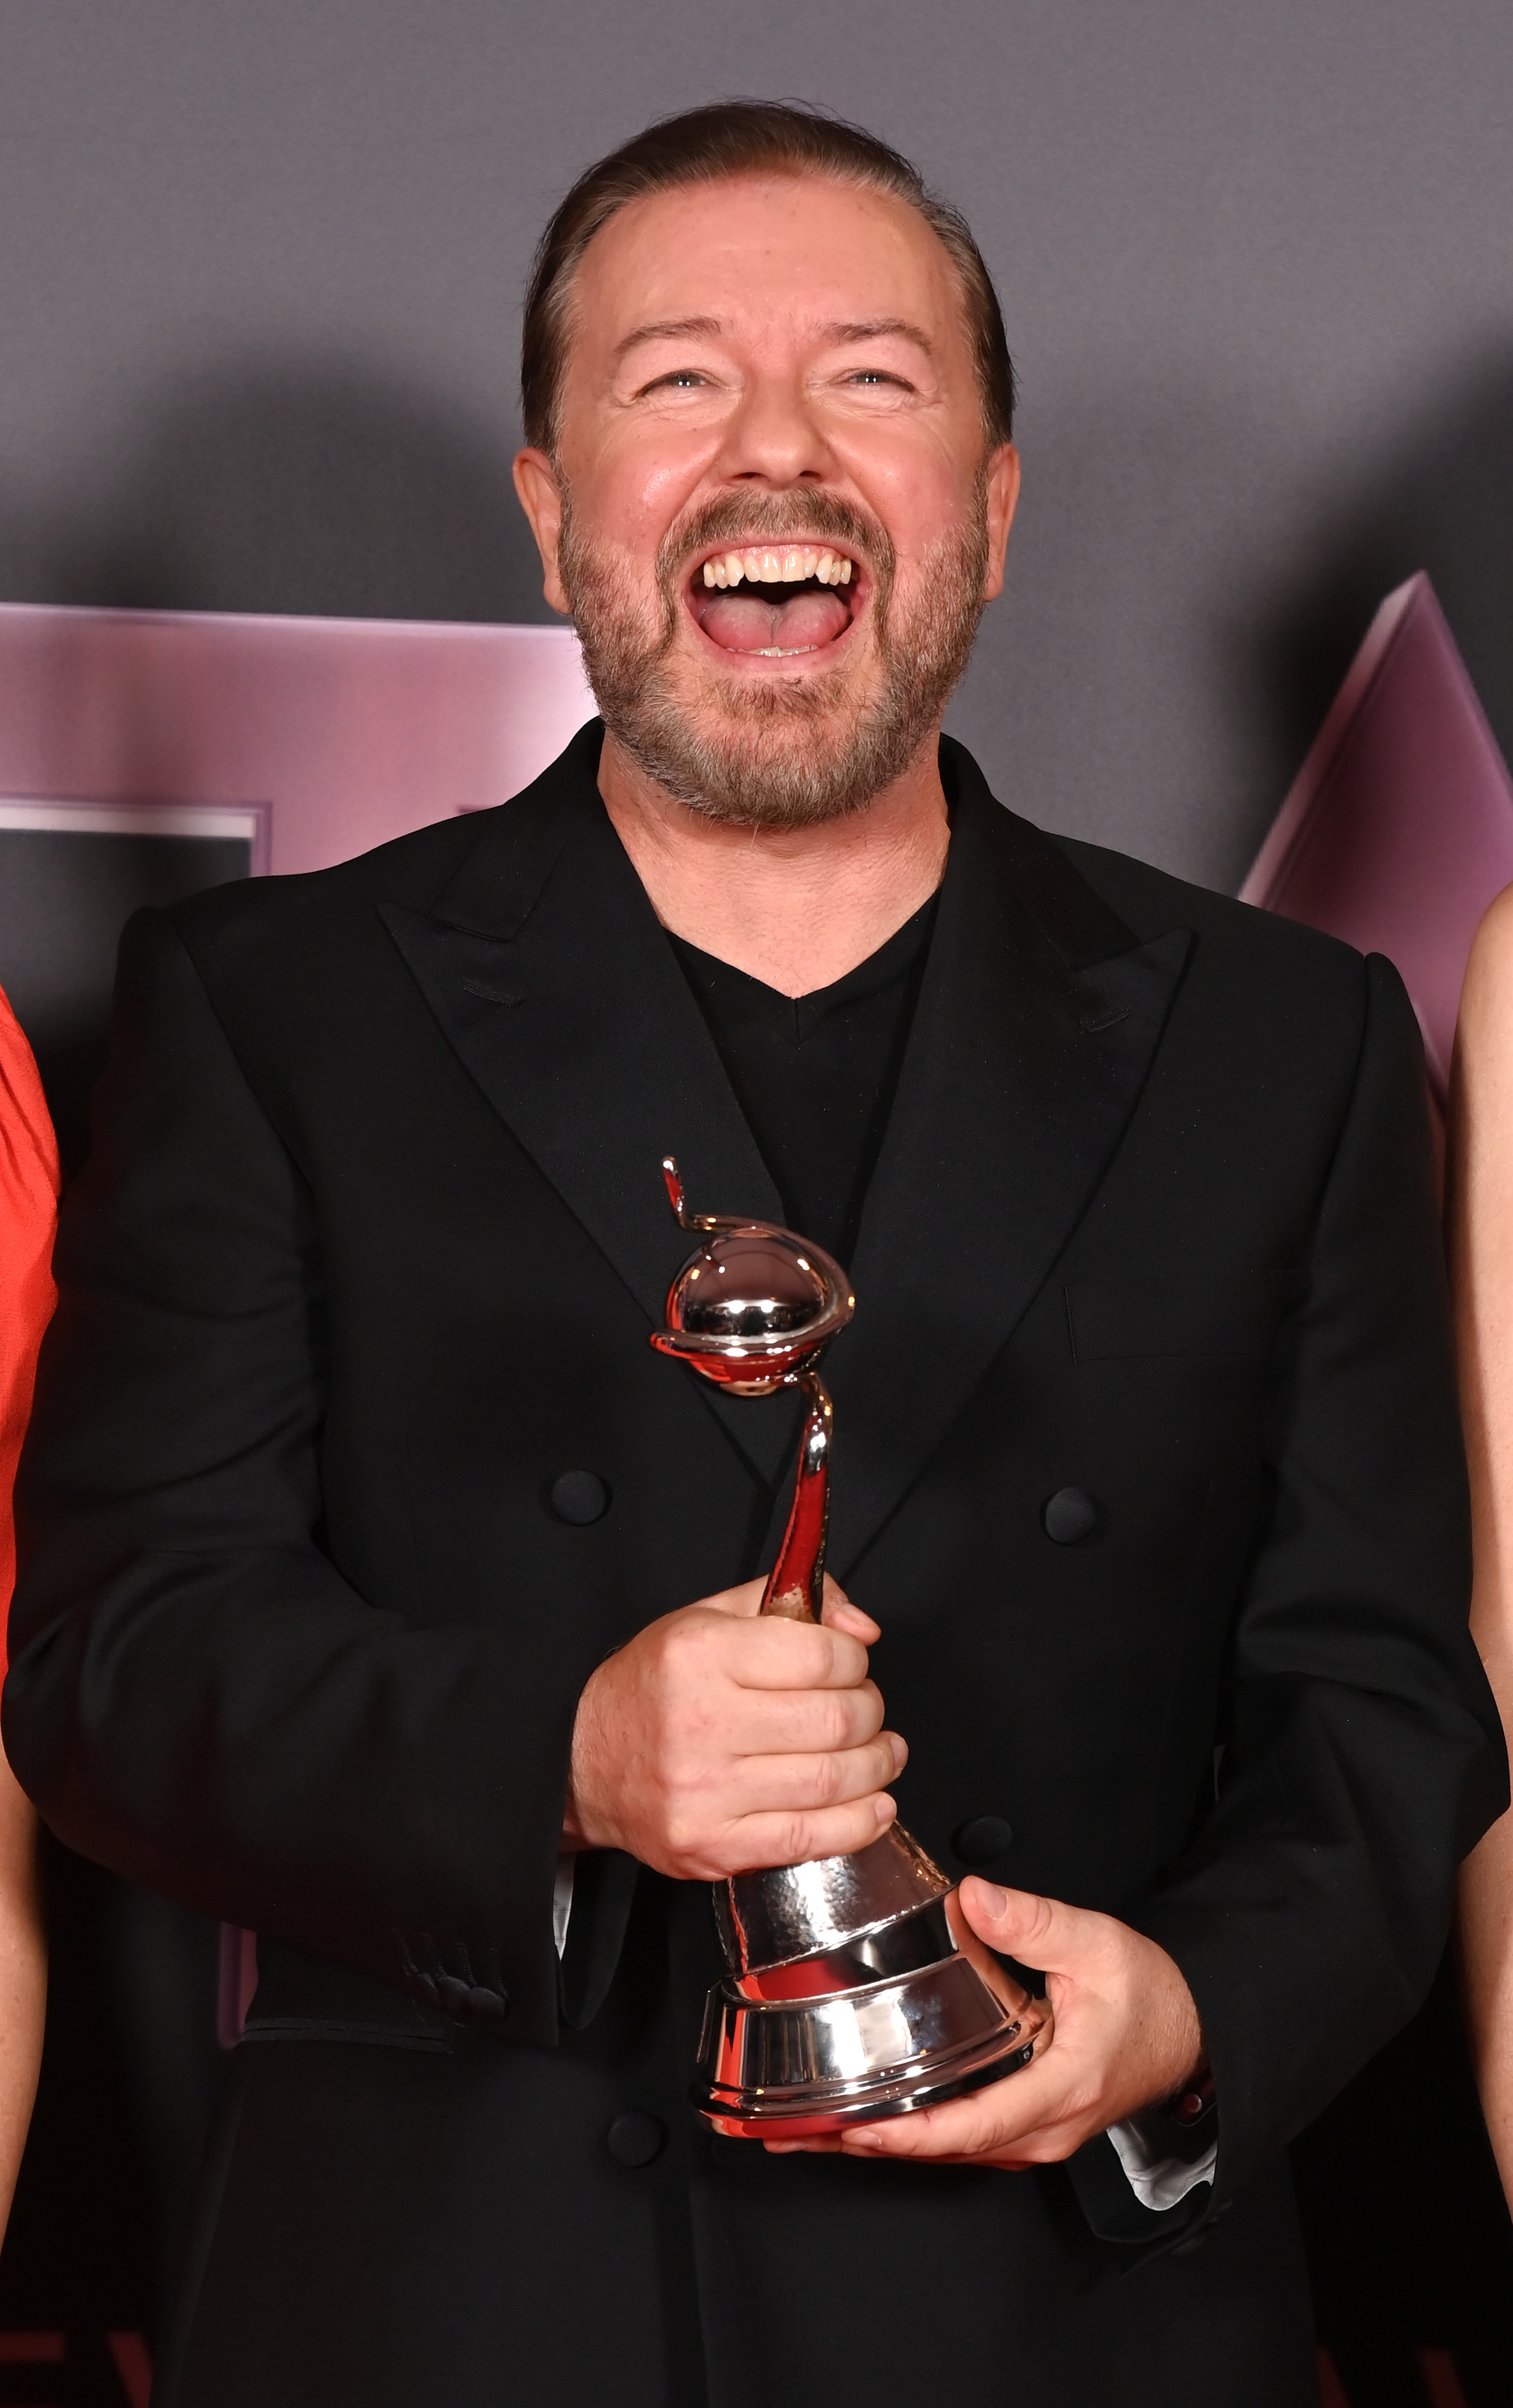 Ricky Gervais poses with the Comedy Award for 'After Life' in the winners' room at the National Television Awards 2022 at OVO Arena Wembley on October 13, 2022, in London, England. | Source: Getty Images